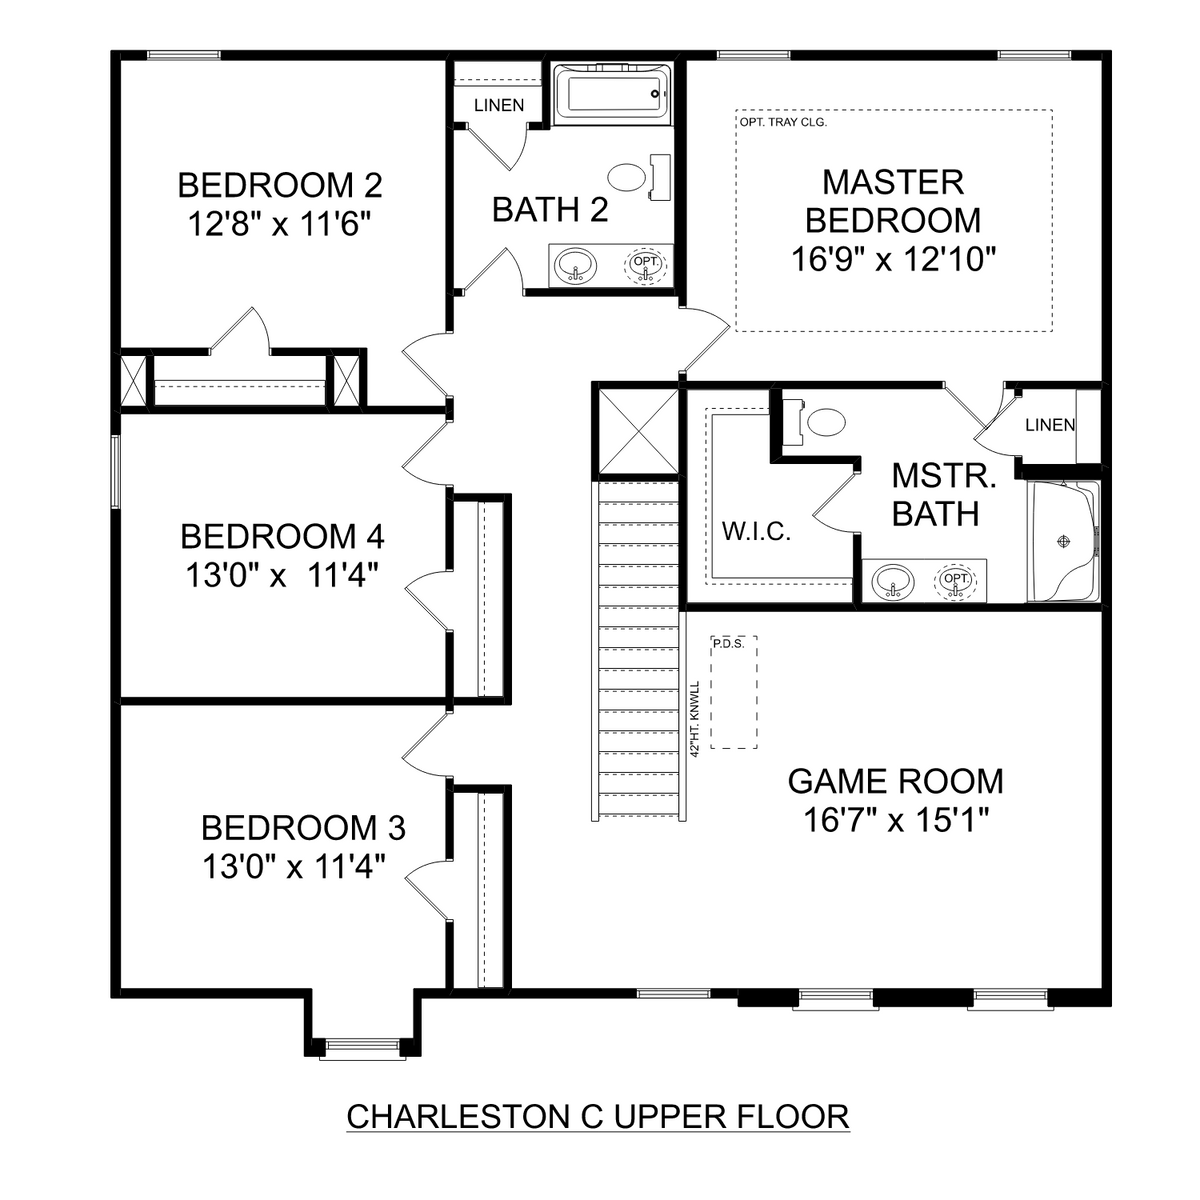 2 - The Charleston C floor plan layout for 172 Cherry Laurel Drive in Davidson Homes' Clearview community.